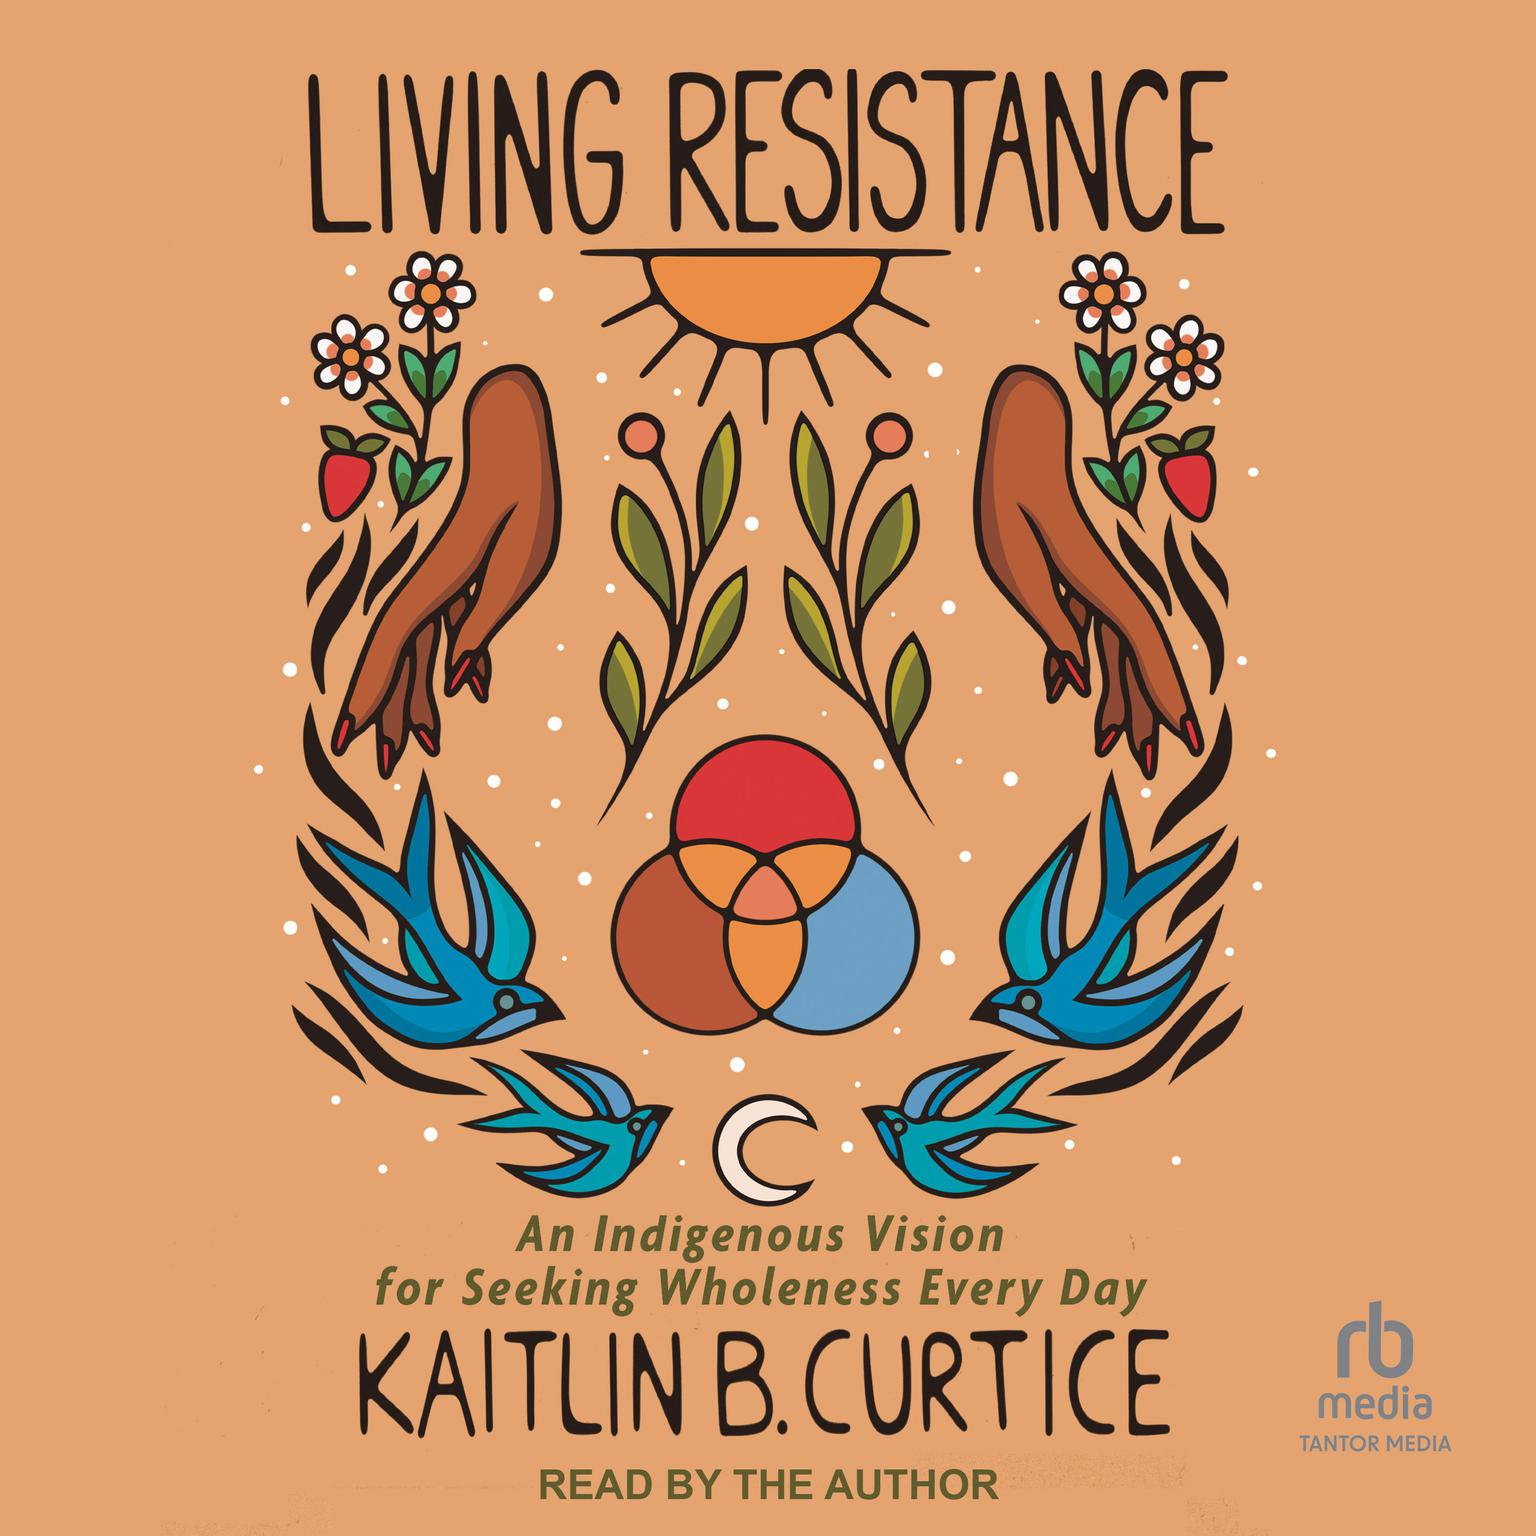 Living Resistance: An Indigenous Vision for Seeking Wholeness Every Day Audiobook, by Kaitlin B. Curtice